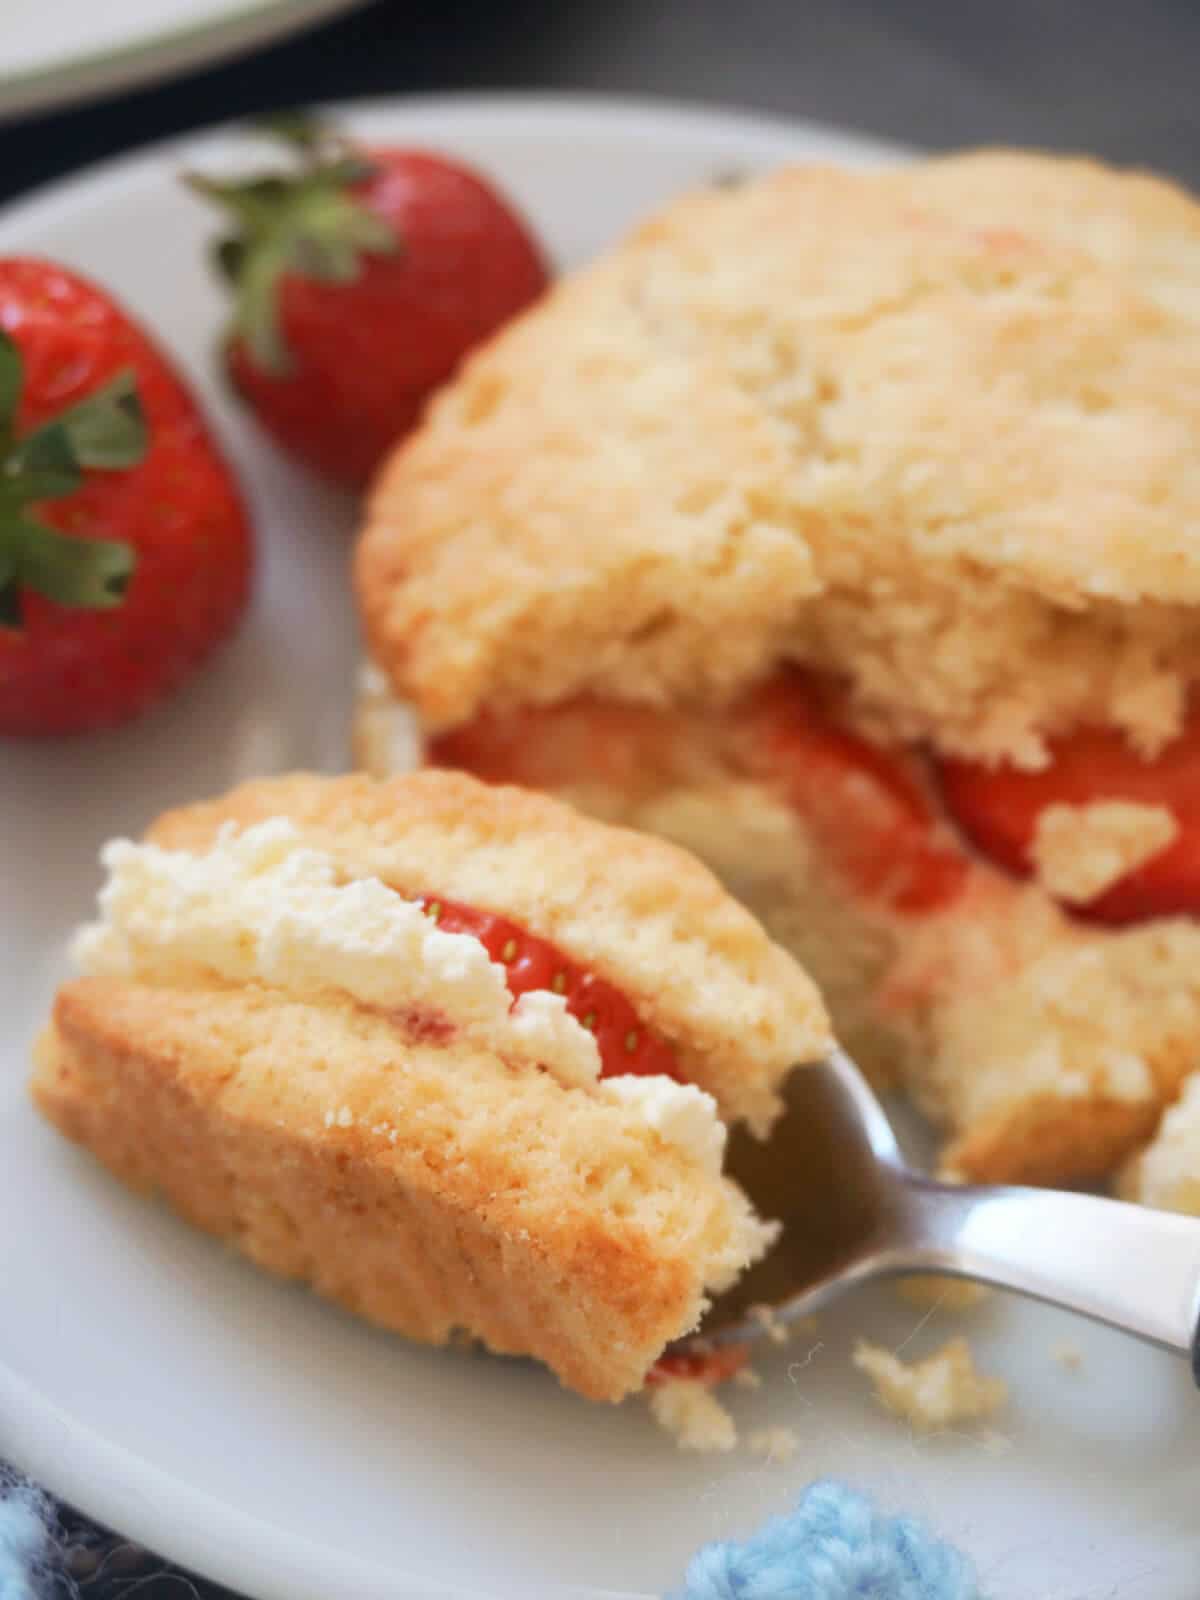 A teaspoon of shortcake with strawberry and cream.